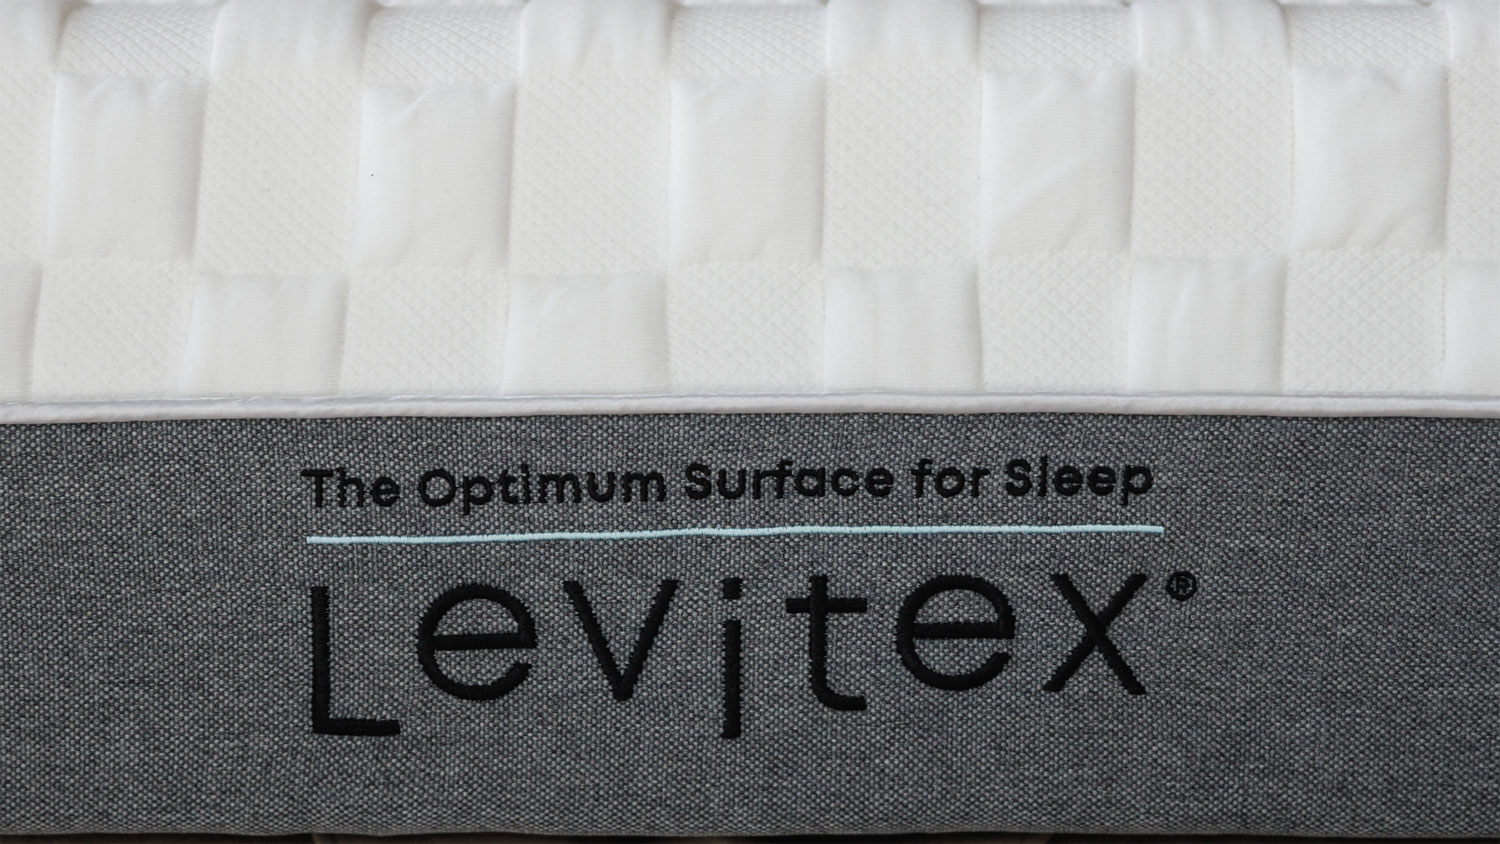 Close-up of the edge of the Levitex Gravity Defying Mattress